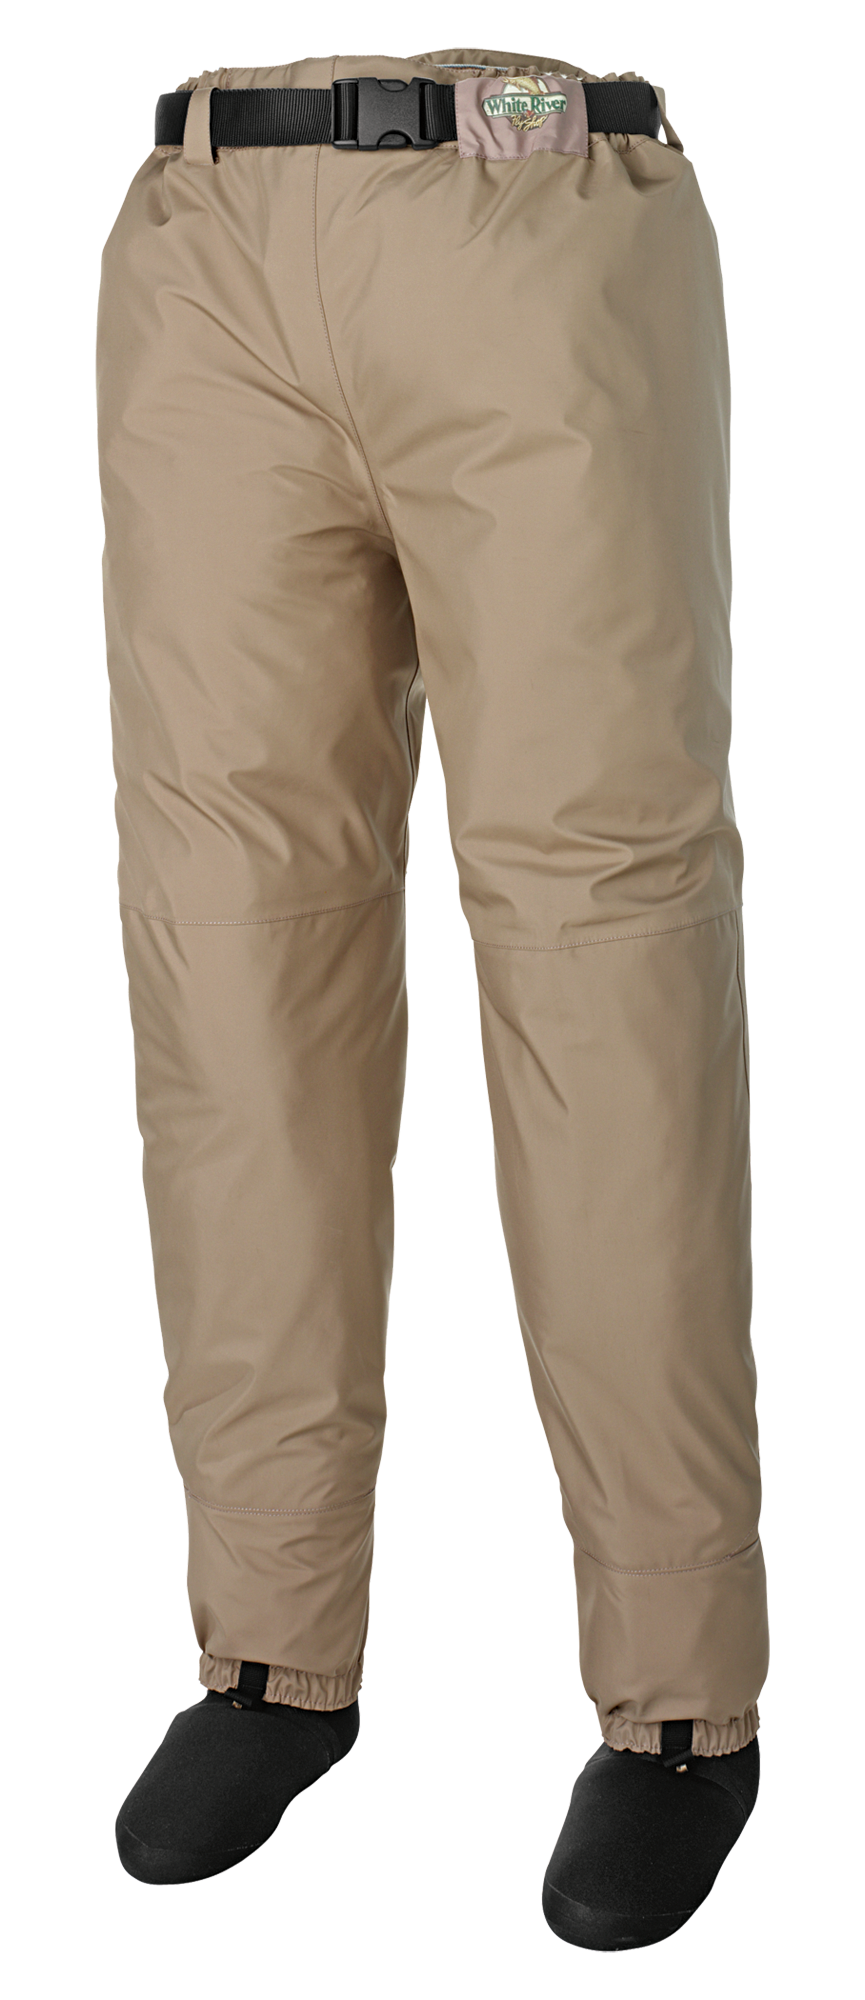 White River Fly Shop Mens Waders Tan Size XL Extra Large Fishing Belted  Pants 